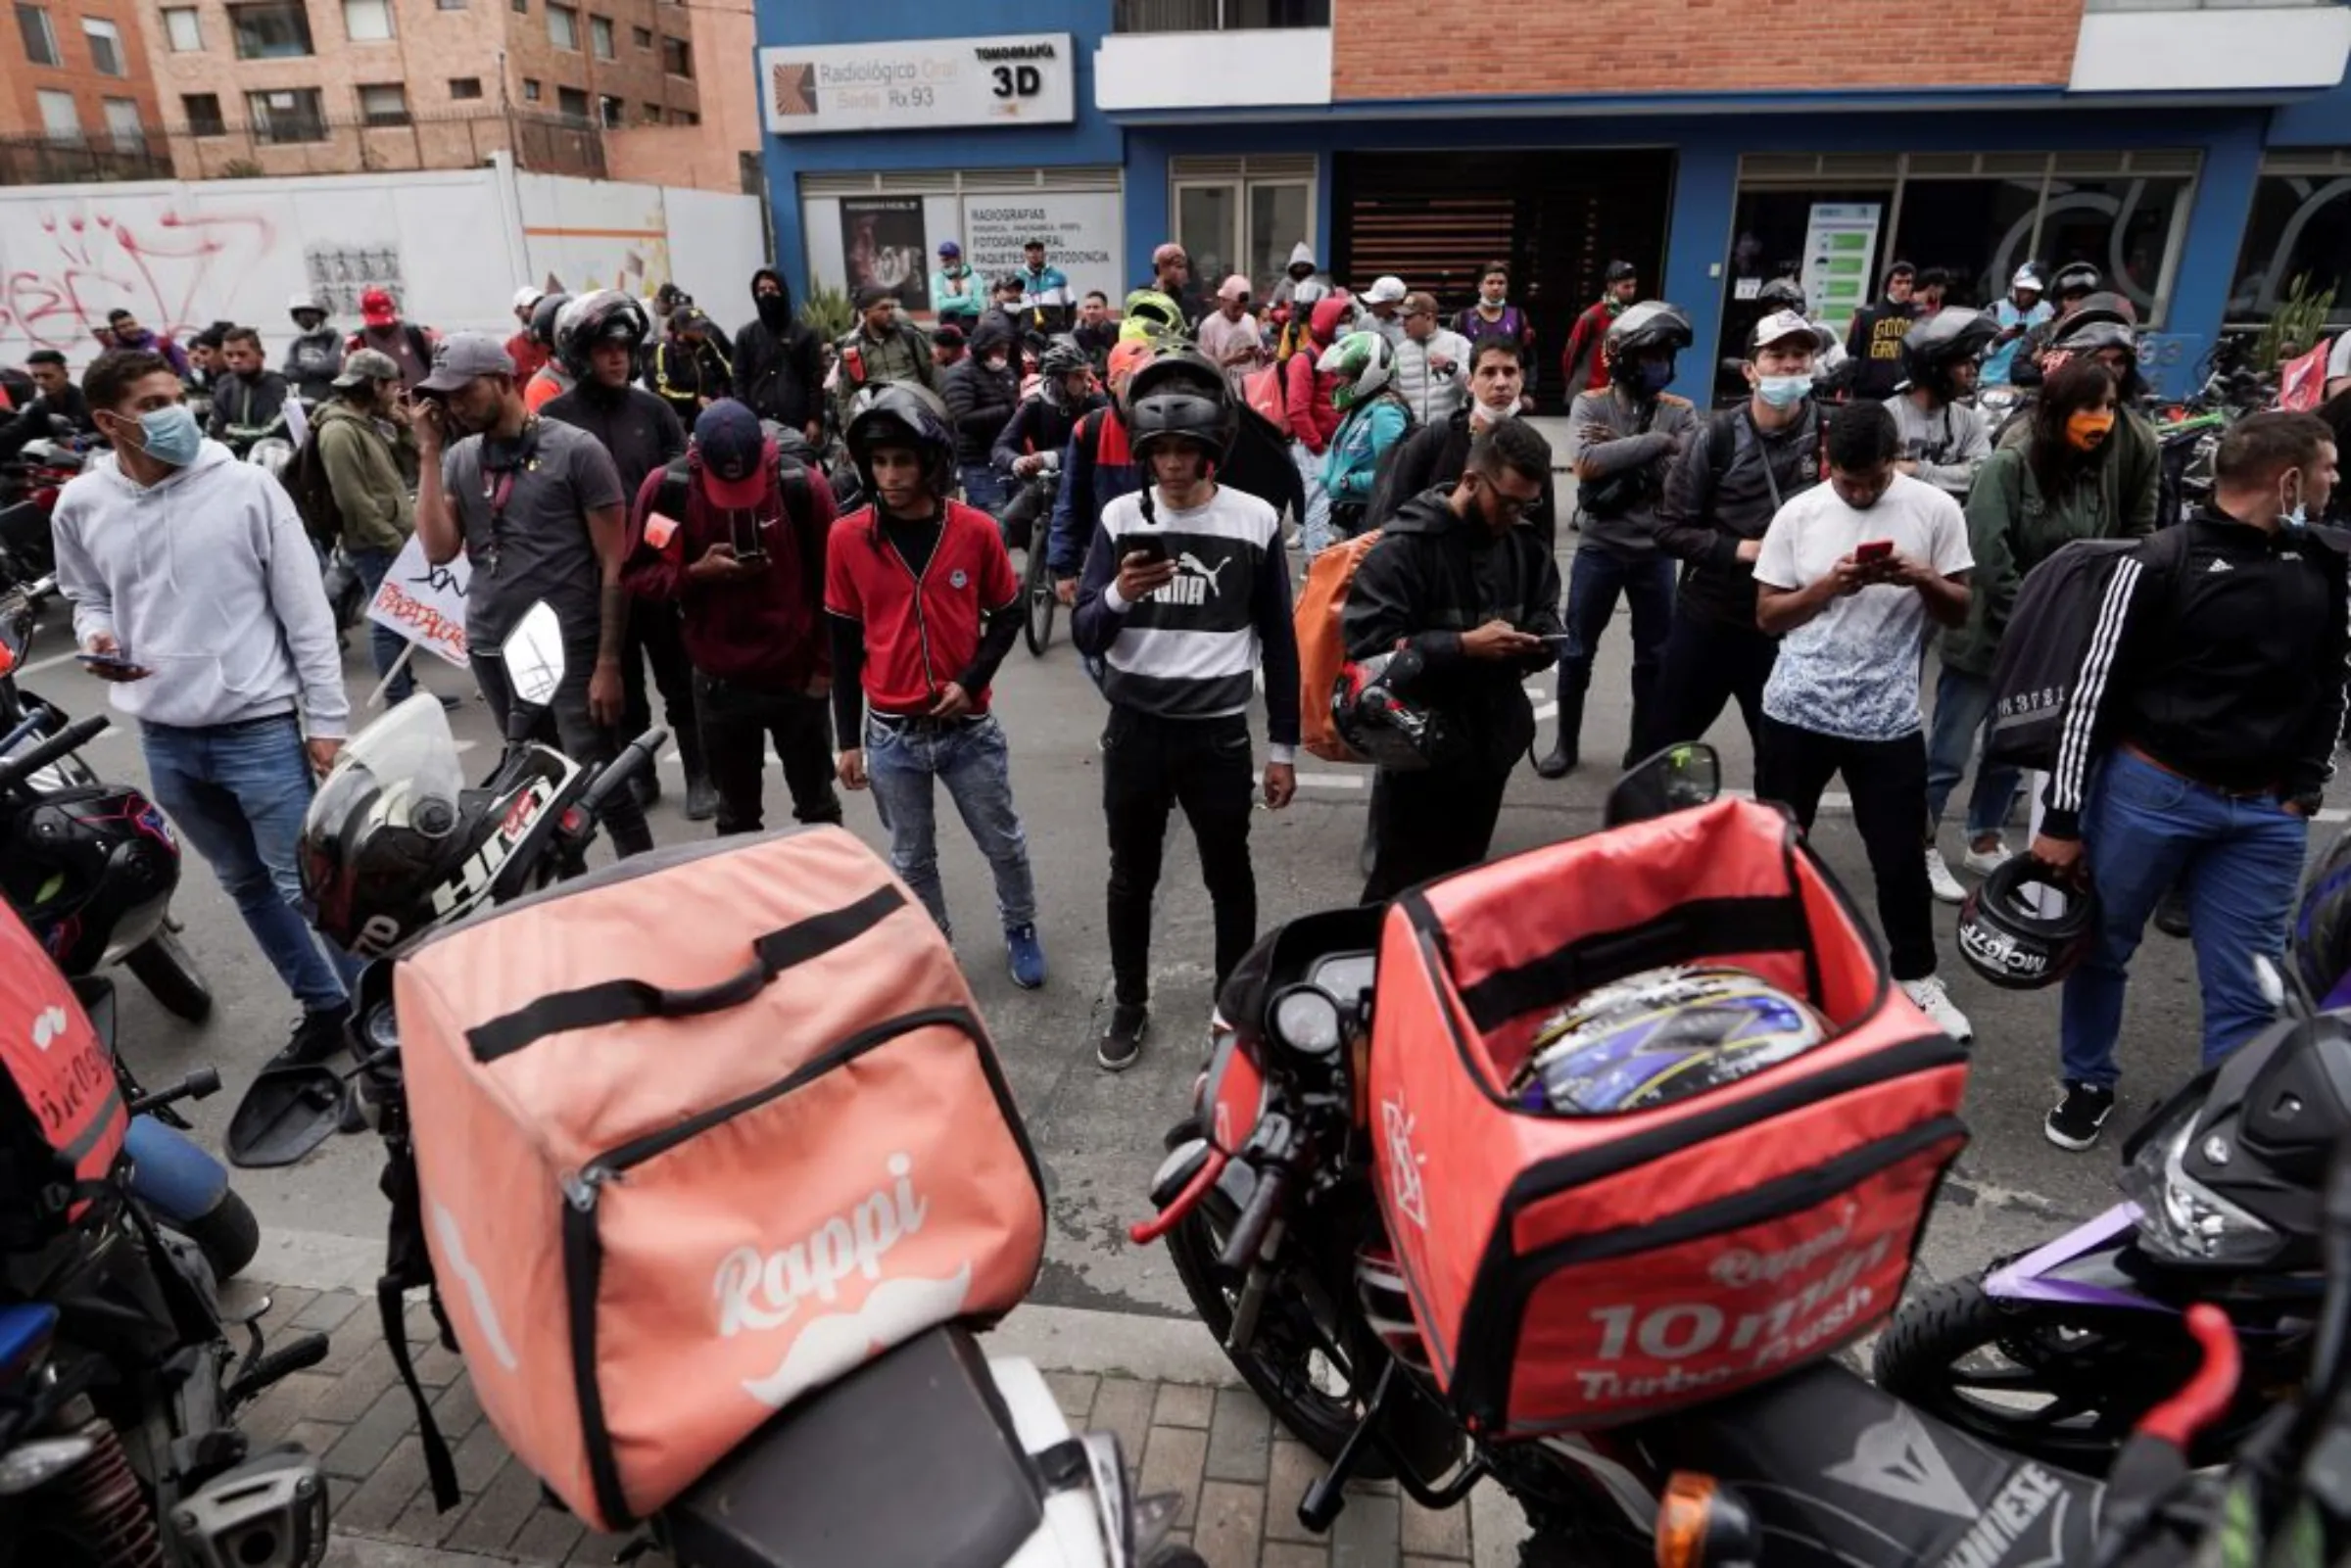 Delivery workers for Rappi and other delivery apps protest as part of a strike to demand better wages and working conditions, in Bogota, Colombia March 2, 2022